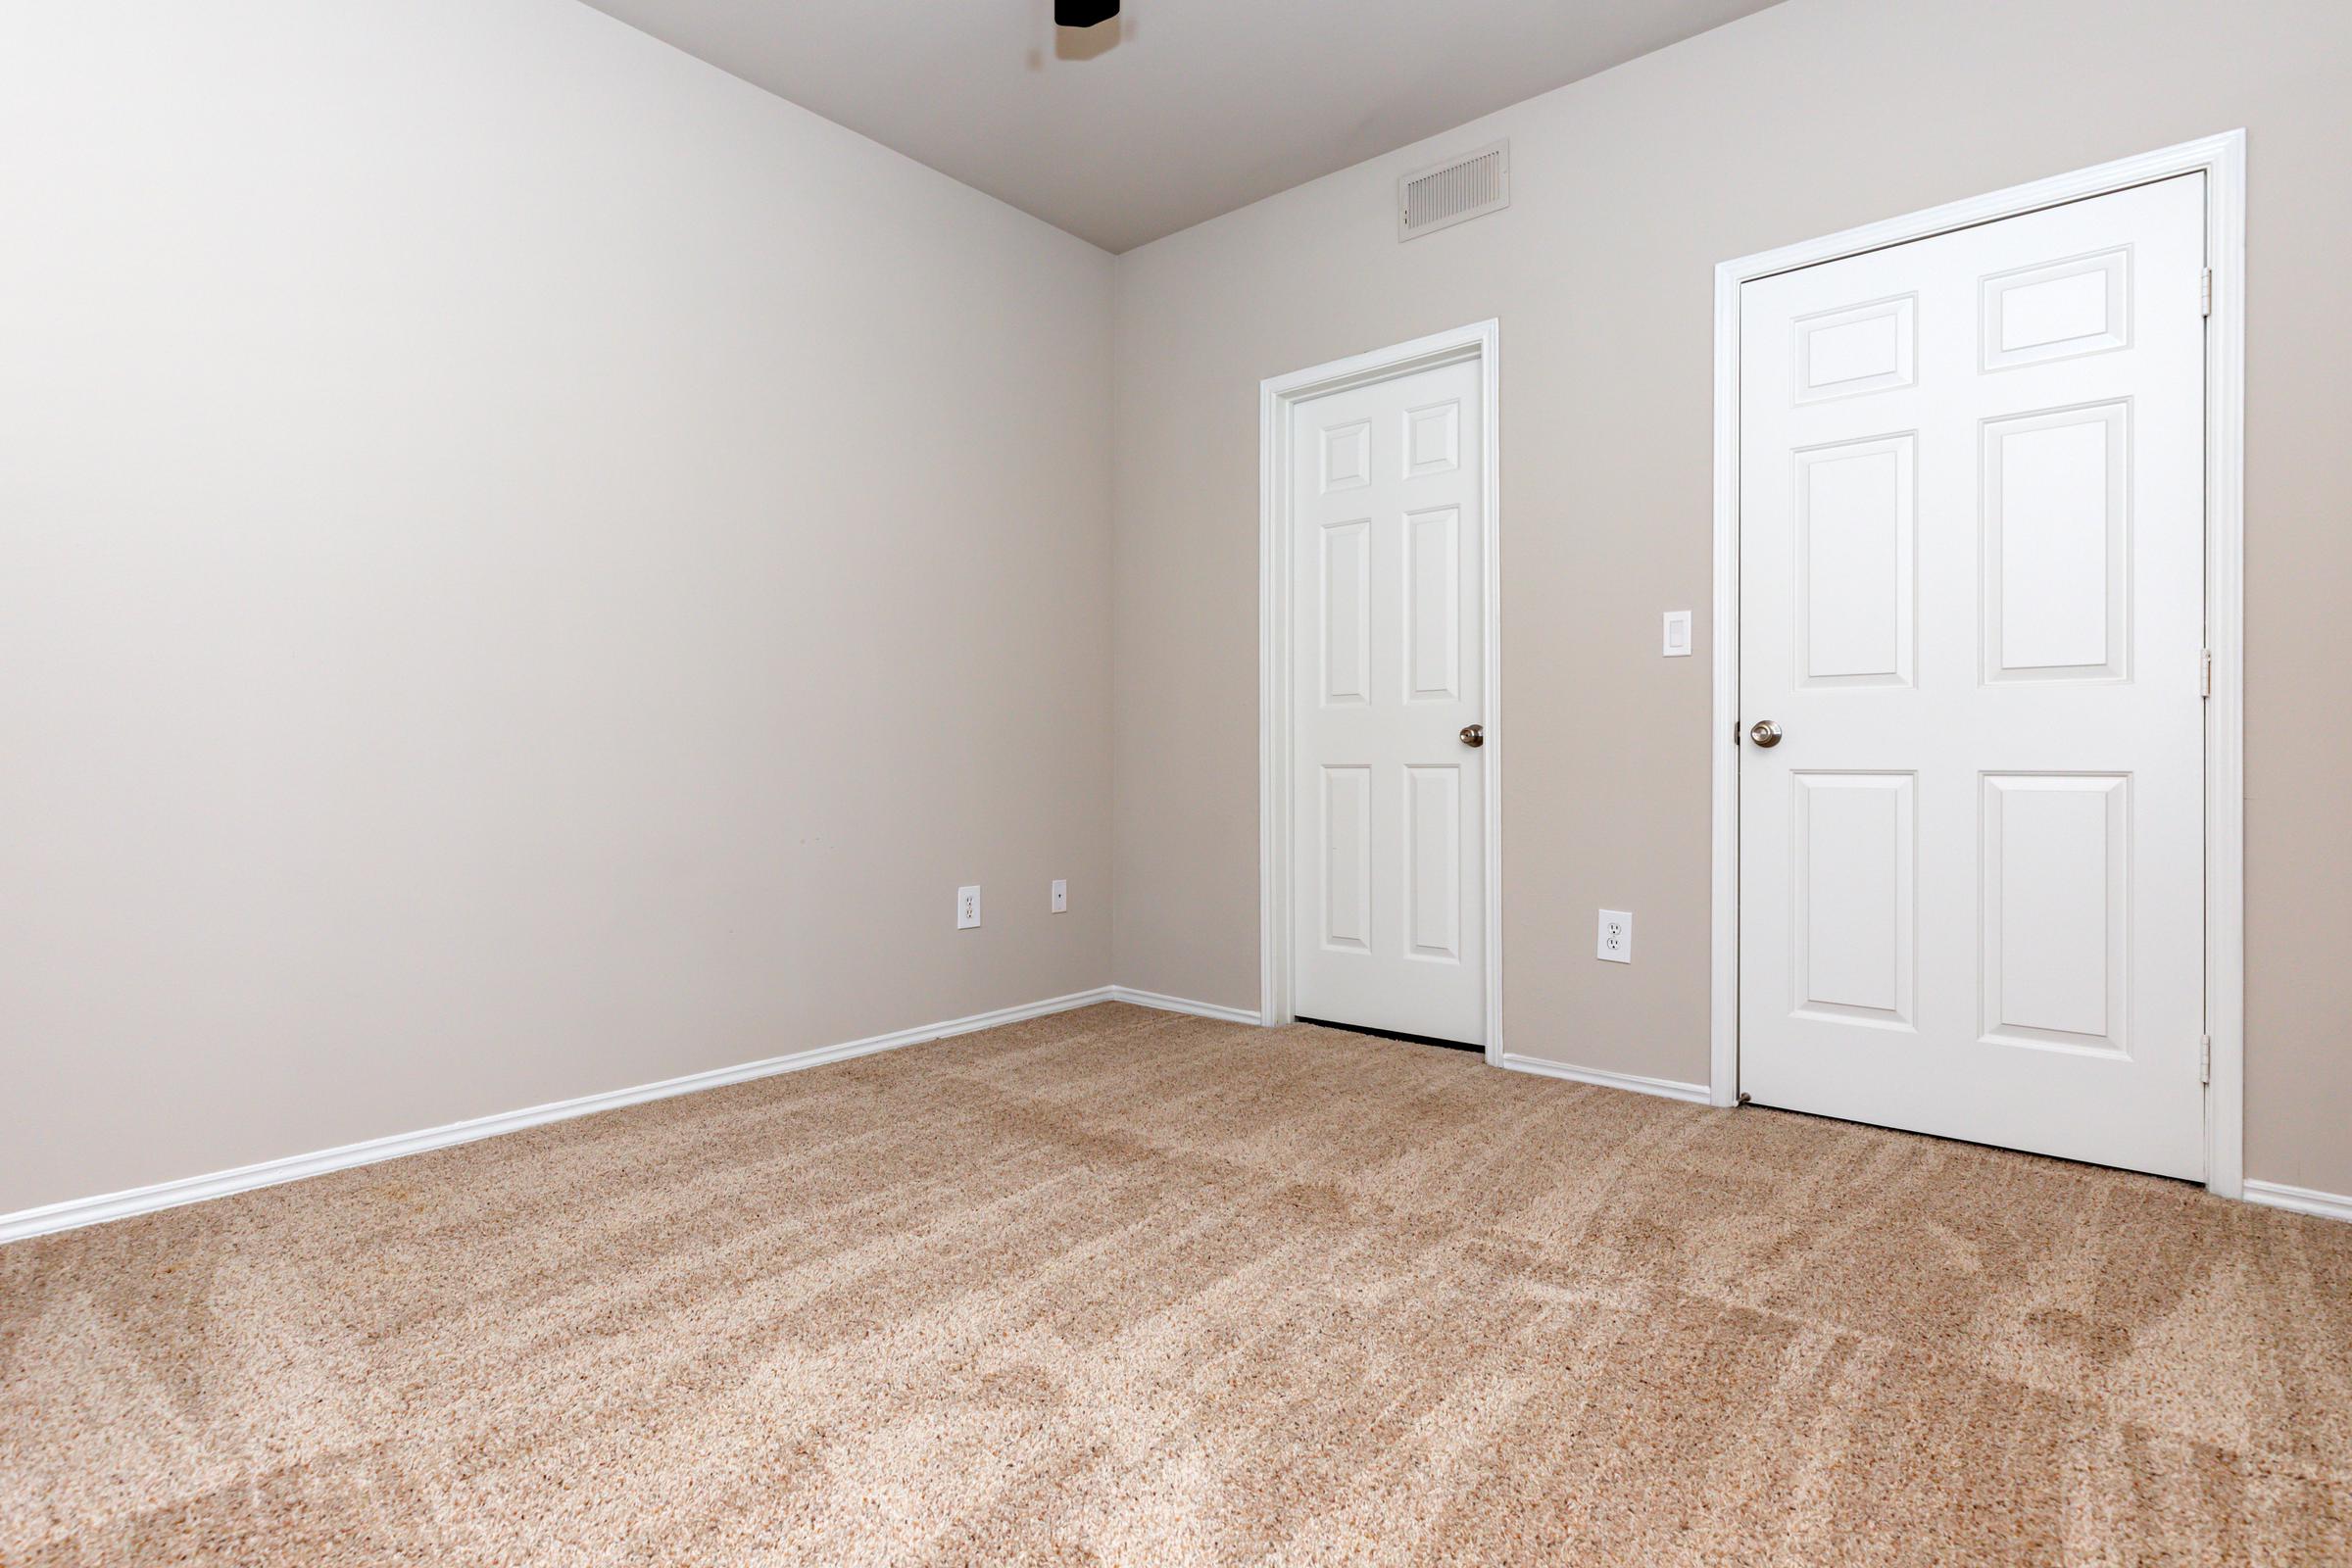 PLUSH CARPETING IN TWO BEDROOM APARTMENTS IN SPRING, TX.